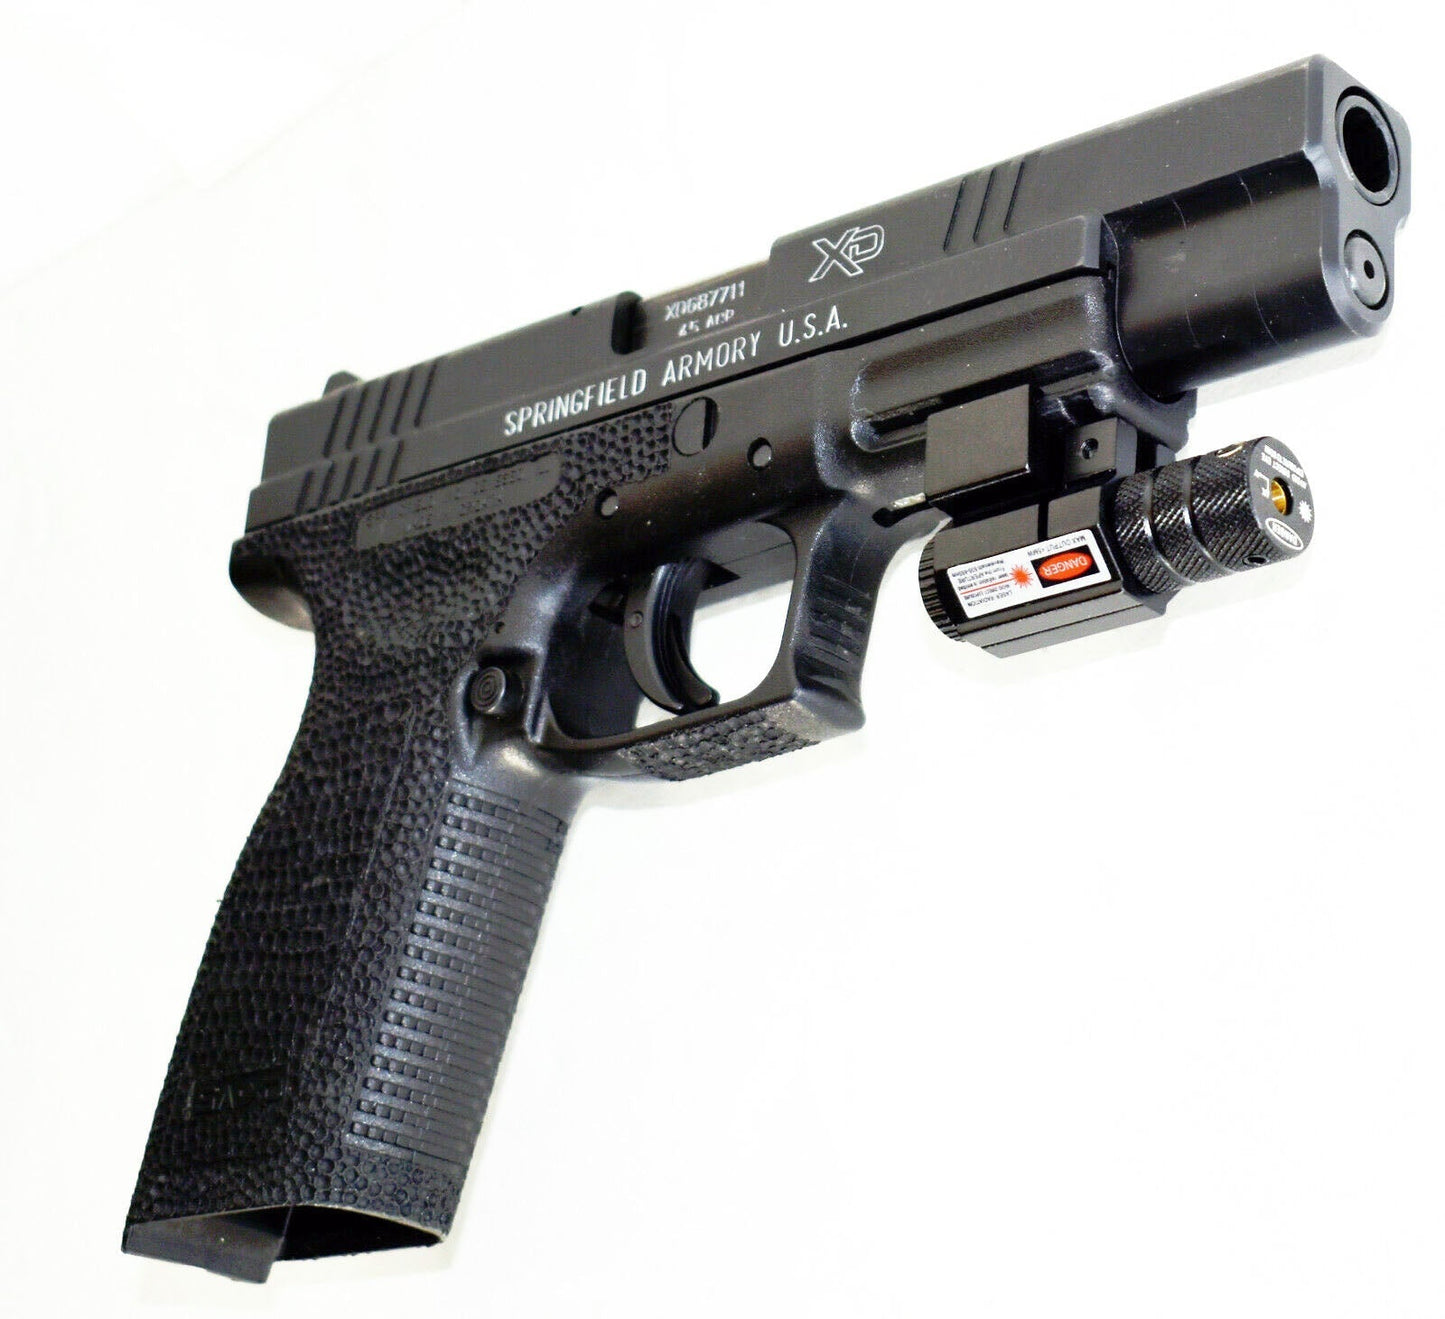 Trinity picatinny Mounted red dot laser Sight For Glock 19 Gen5 accessories home defense.